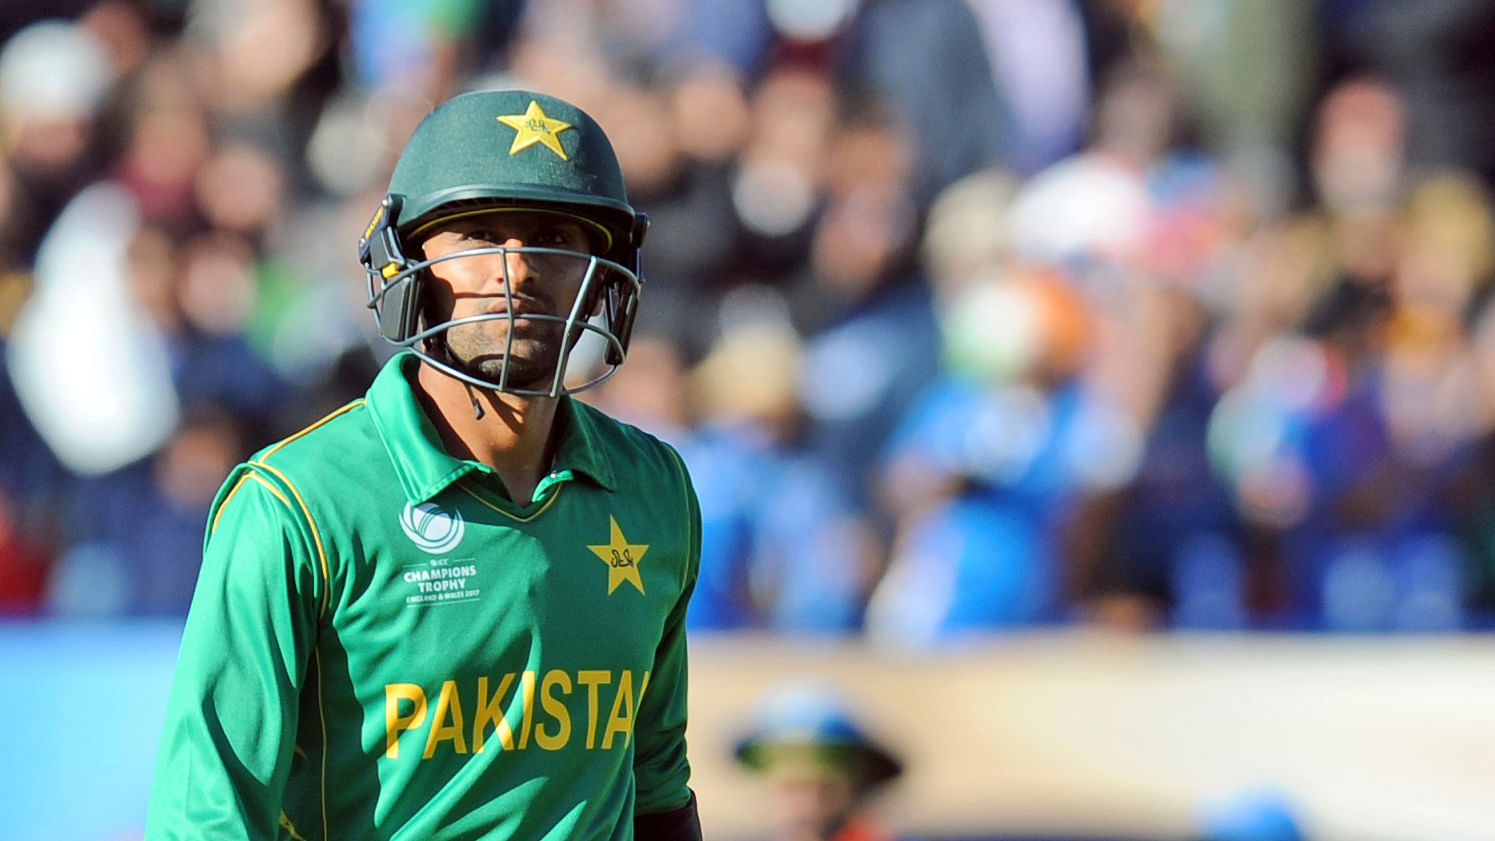 Pakistan all-rounders Mohammad Hafeez and Shoaib Malik were omitted from the list of 19 players who were awarded central contracts.